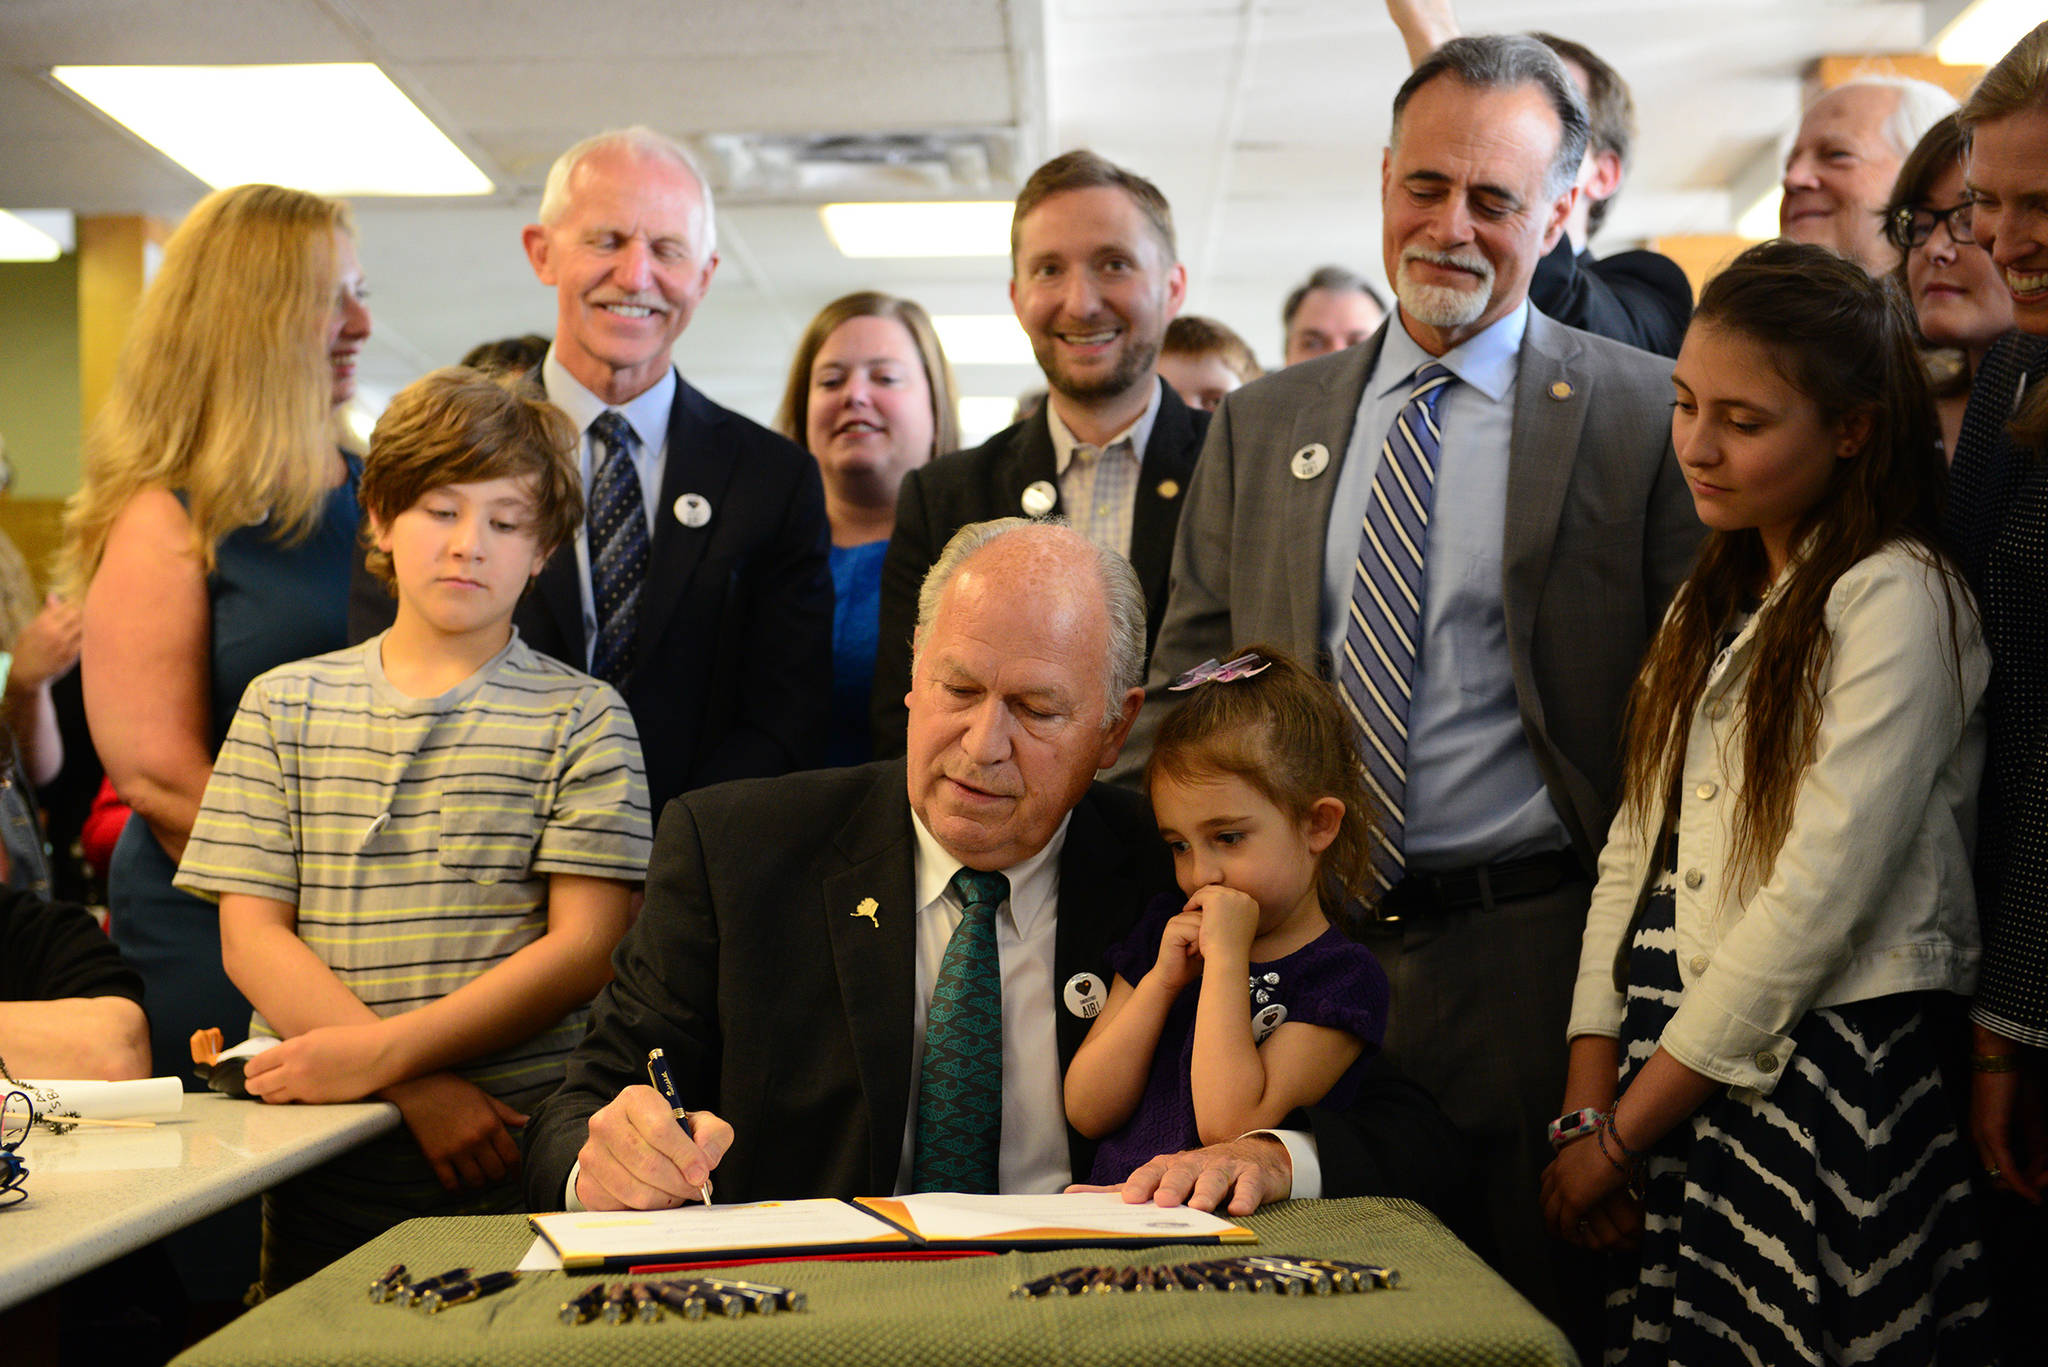 In a photo provided by the office of the governor, Gov. Bill Walker signs Senate Bill 63, a statewide public smoking ban, on Tuesday, July 17, 2018, at the Lucky Wishbone restaurant in Anchorage. The law goes into effect on Oct. 1. Standing at right is Sen. Peter Micciche, R-Soldotna, the legislative sponsor of the bill. On Walker’s lap is Stella Micciche, one of Micciche’s daughters. Also visible, from right to left behind Walker are Dr. Jay Butler, Alaska’s chief medical officer; Rep. Geran Tarr, D-Anchorage; Rep. Jason Grenn, I-Anchorage; Micciche; Rep. Chris Birch, R-Anchorage; and the smile of Emily Nenon of the American Cancer Society. (Courtesy photo)